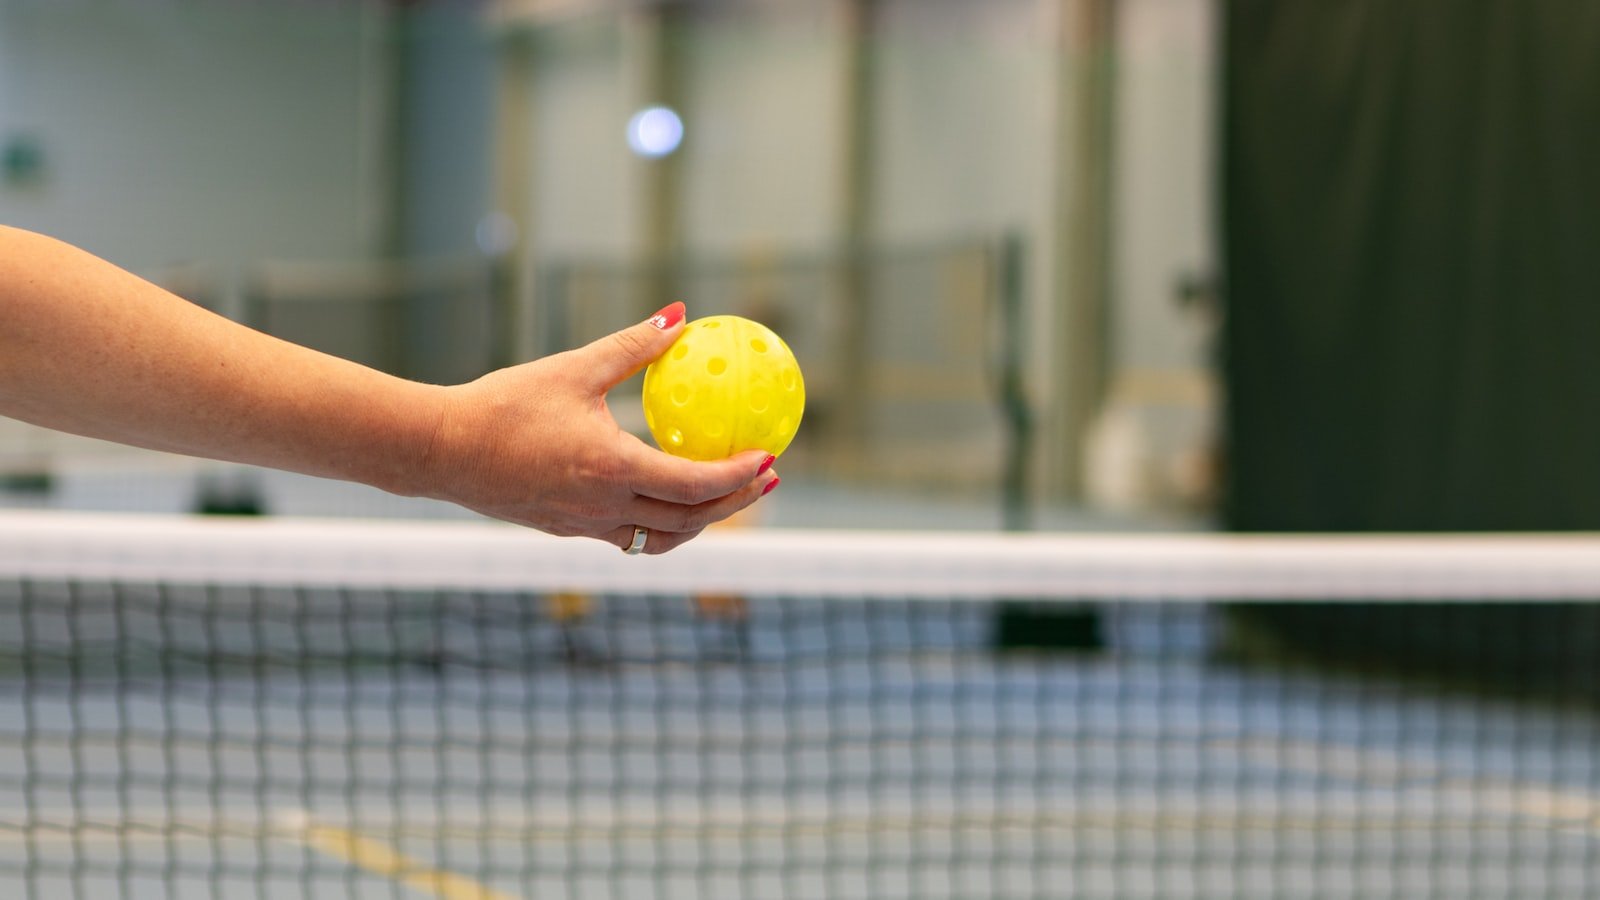 The Connection Between Pickleball and Artistic Expression